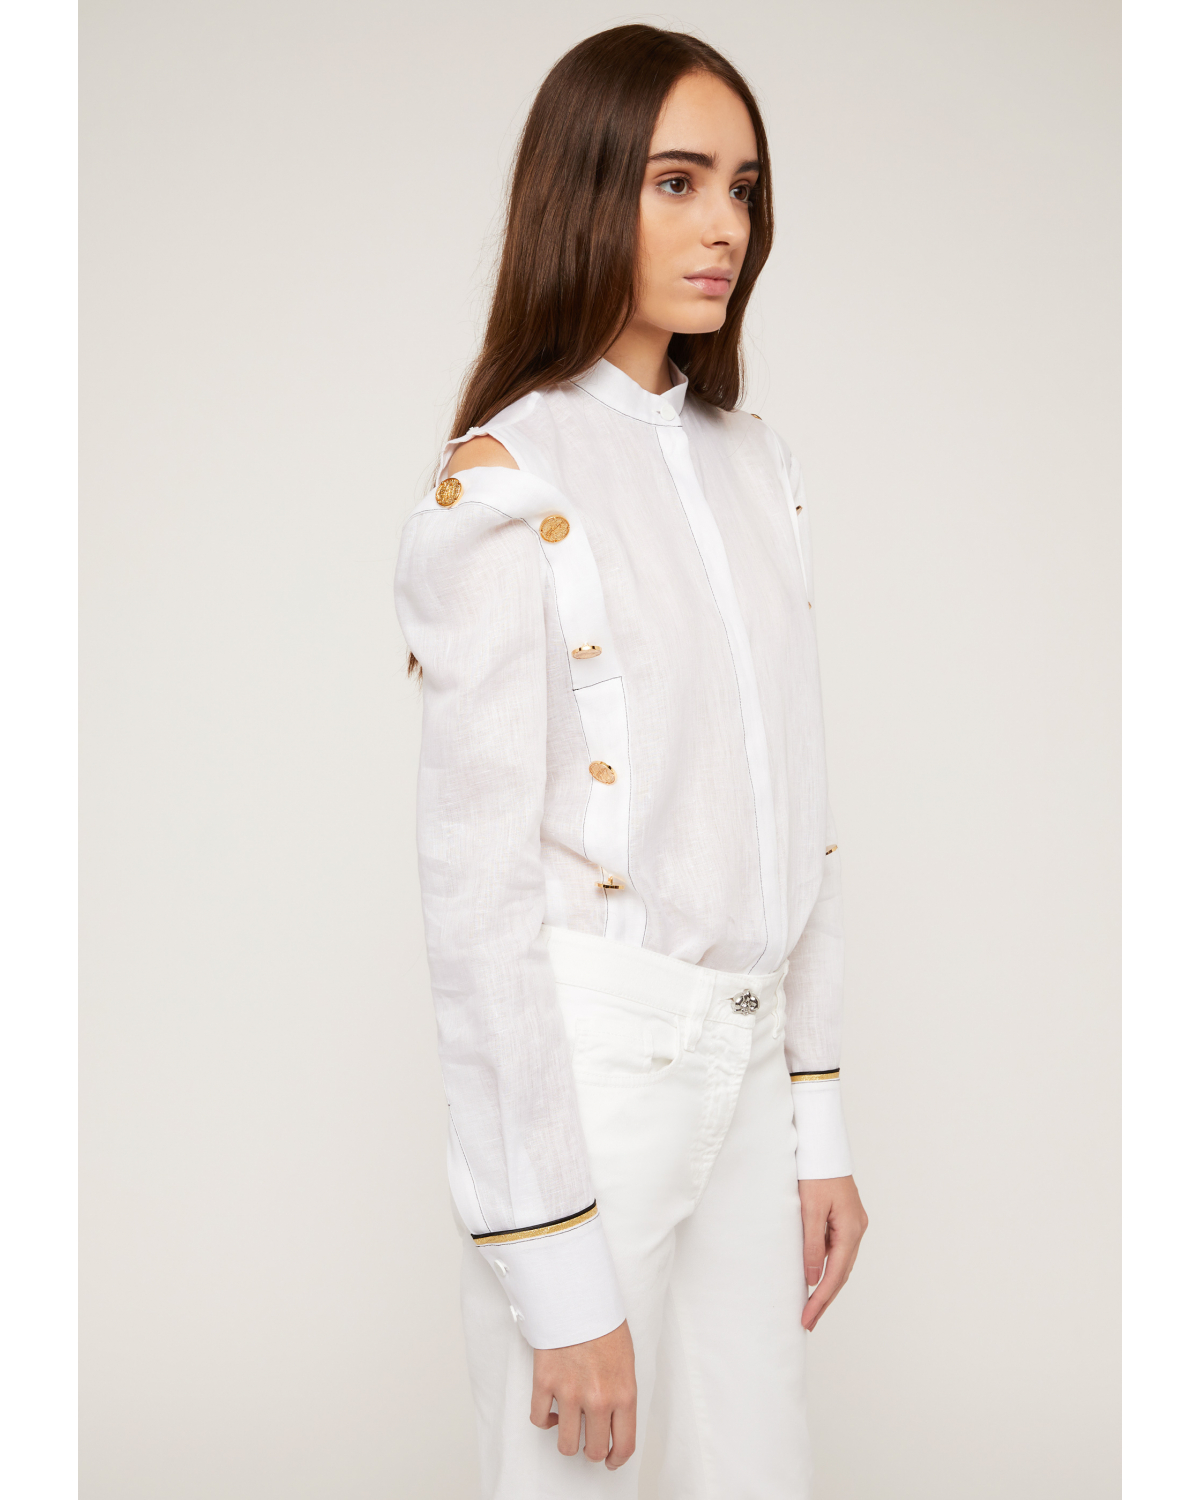 Linen white shirt with visible golden buttons | 73_74, Mid season sale -40%, Summer Sale | Genny